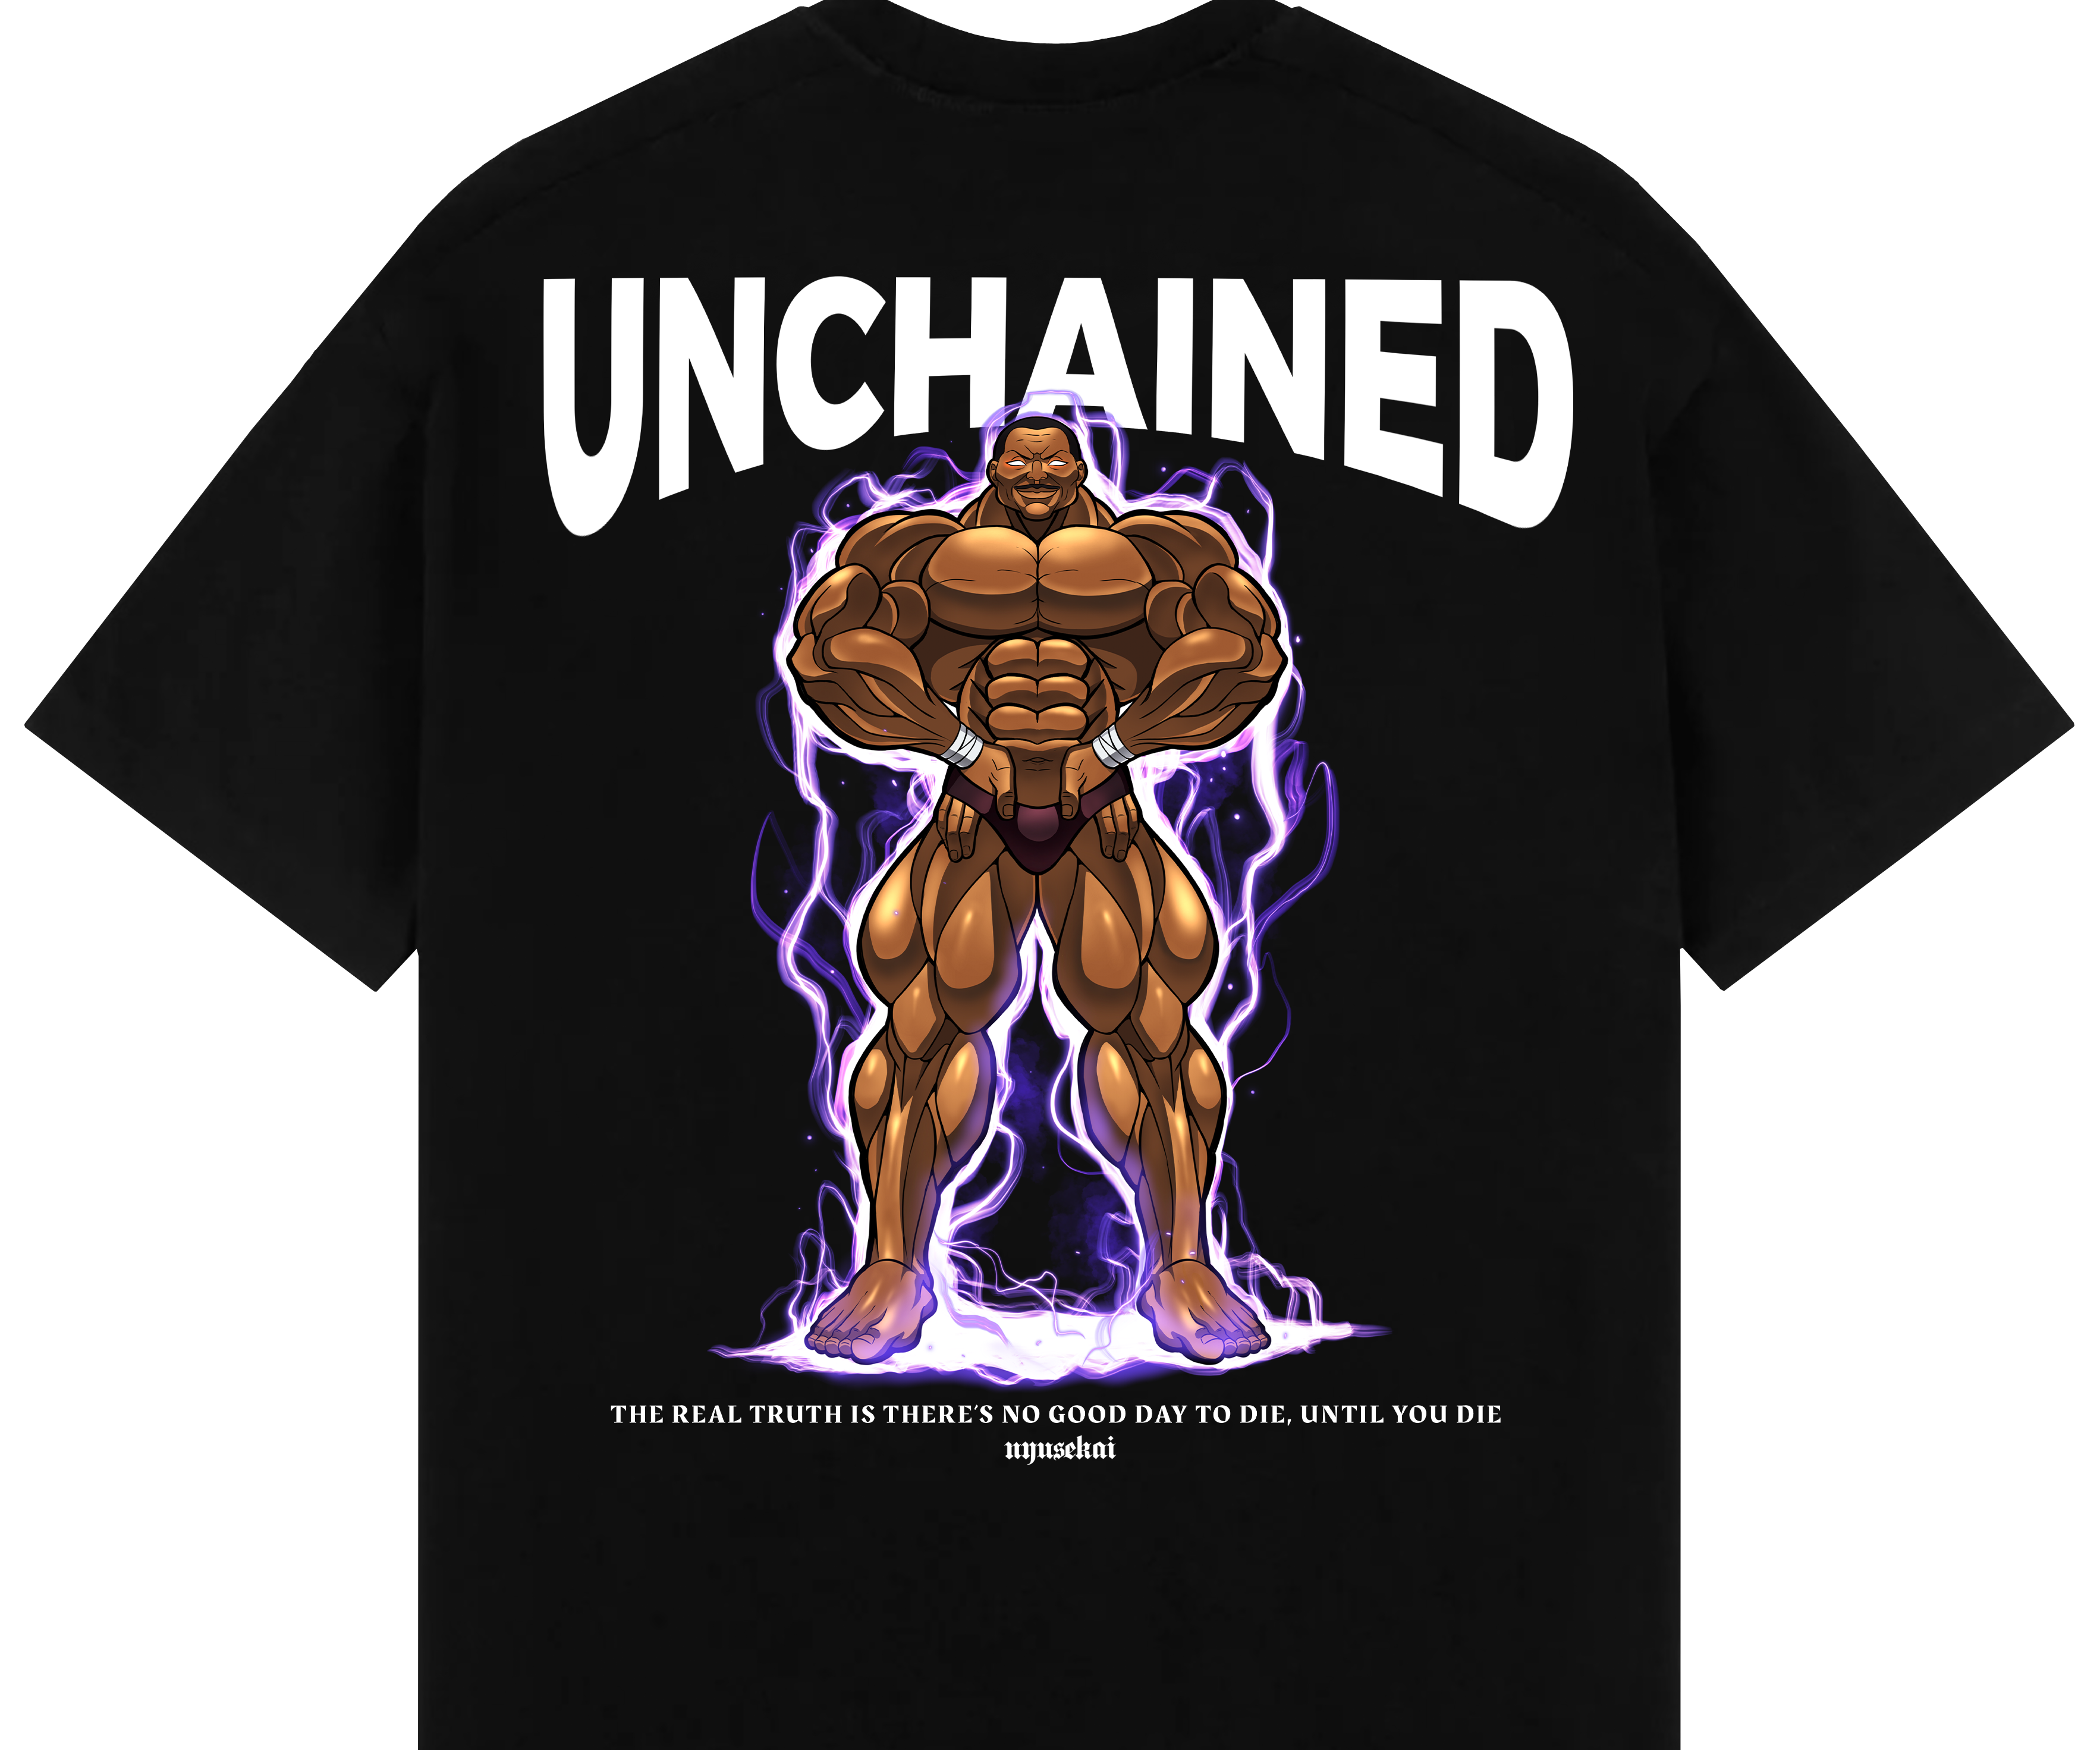 "Biscuit X Unchained - BAKI" Oversized T-Shirt